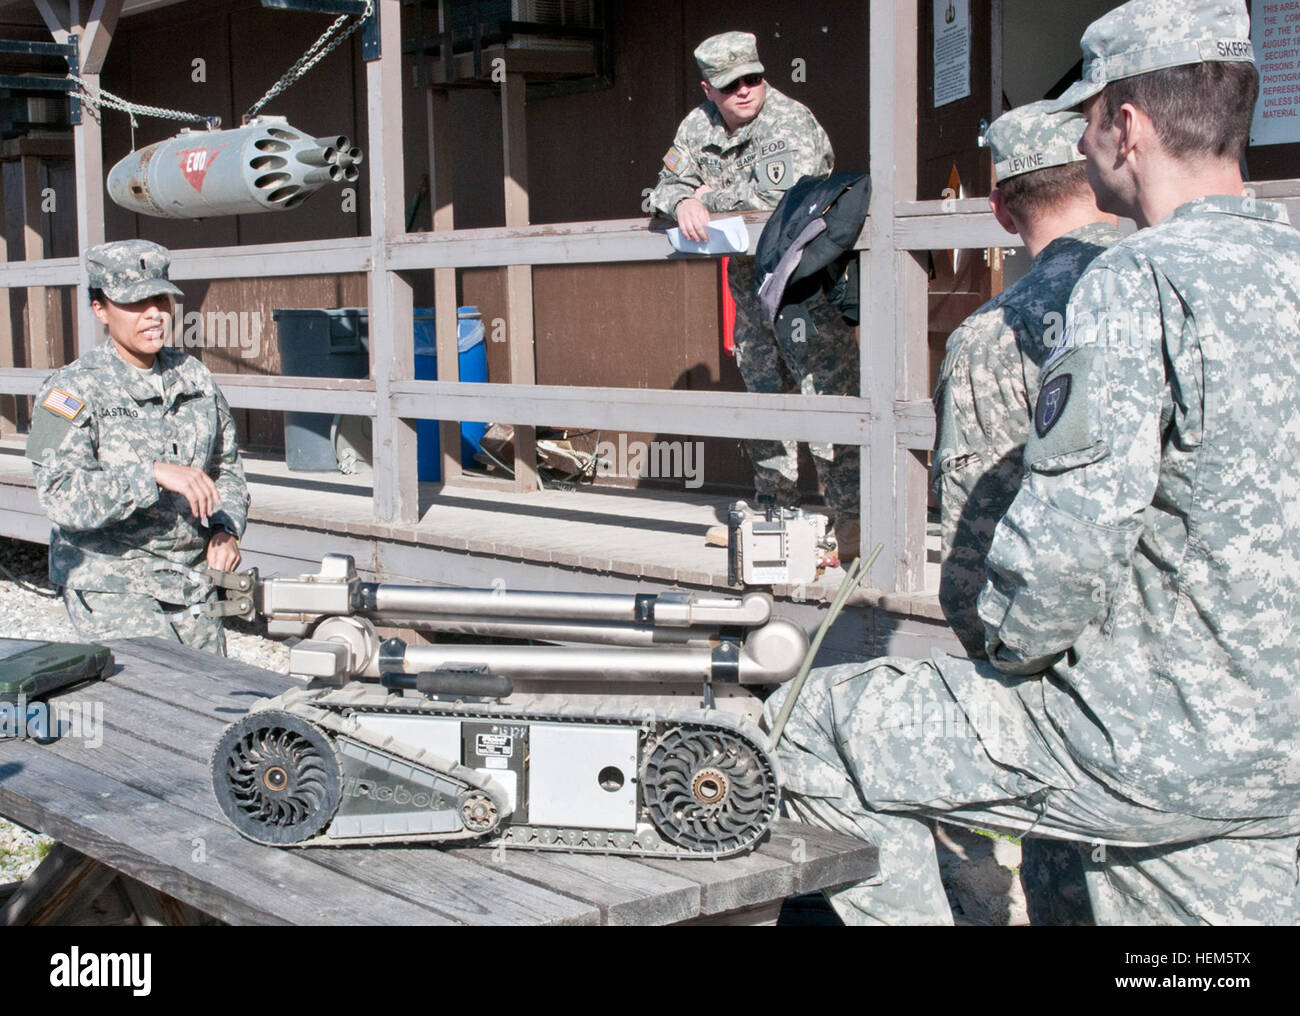 First Lt. Janill Castillo, a native of Bronx, N.Y., supervises training at the EOD detachment on Camp Bondsteel Feb. 25. The 26-year-old is part of few careers that already has females that have been on the front lines of combat. 'Not just an EOD officer' 140225-A-KM241-005 Stock Photo